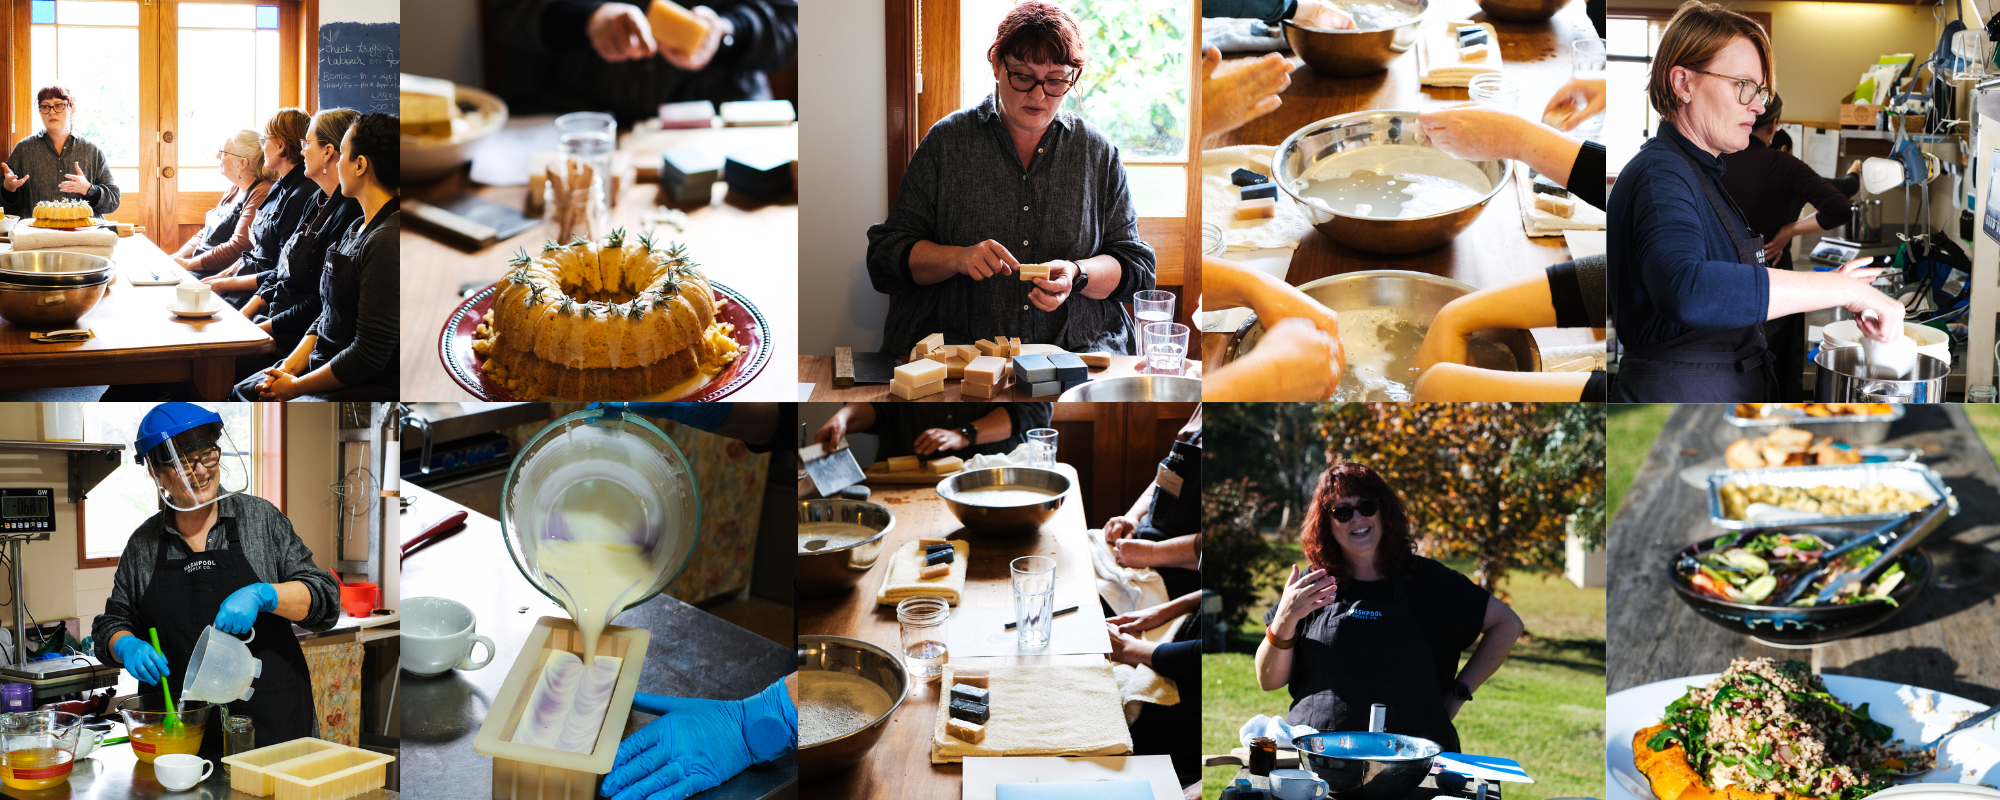 Find out why our Soap Making Workshops are so popular